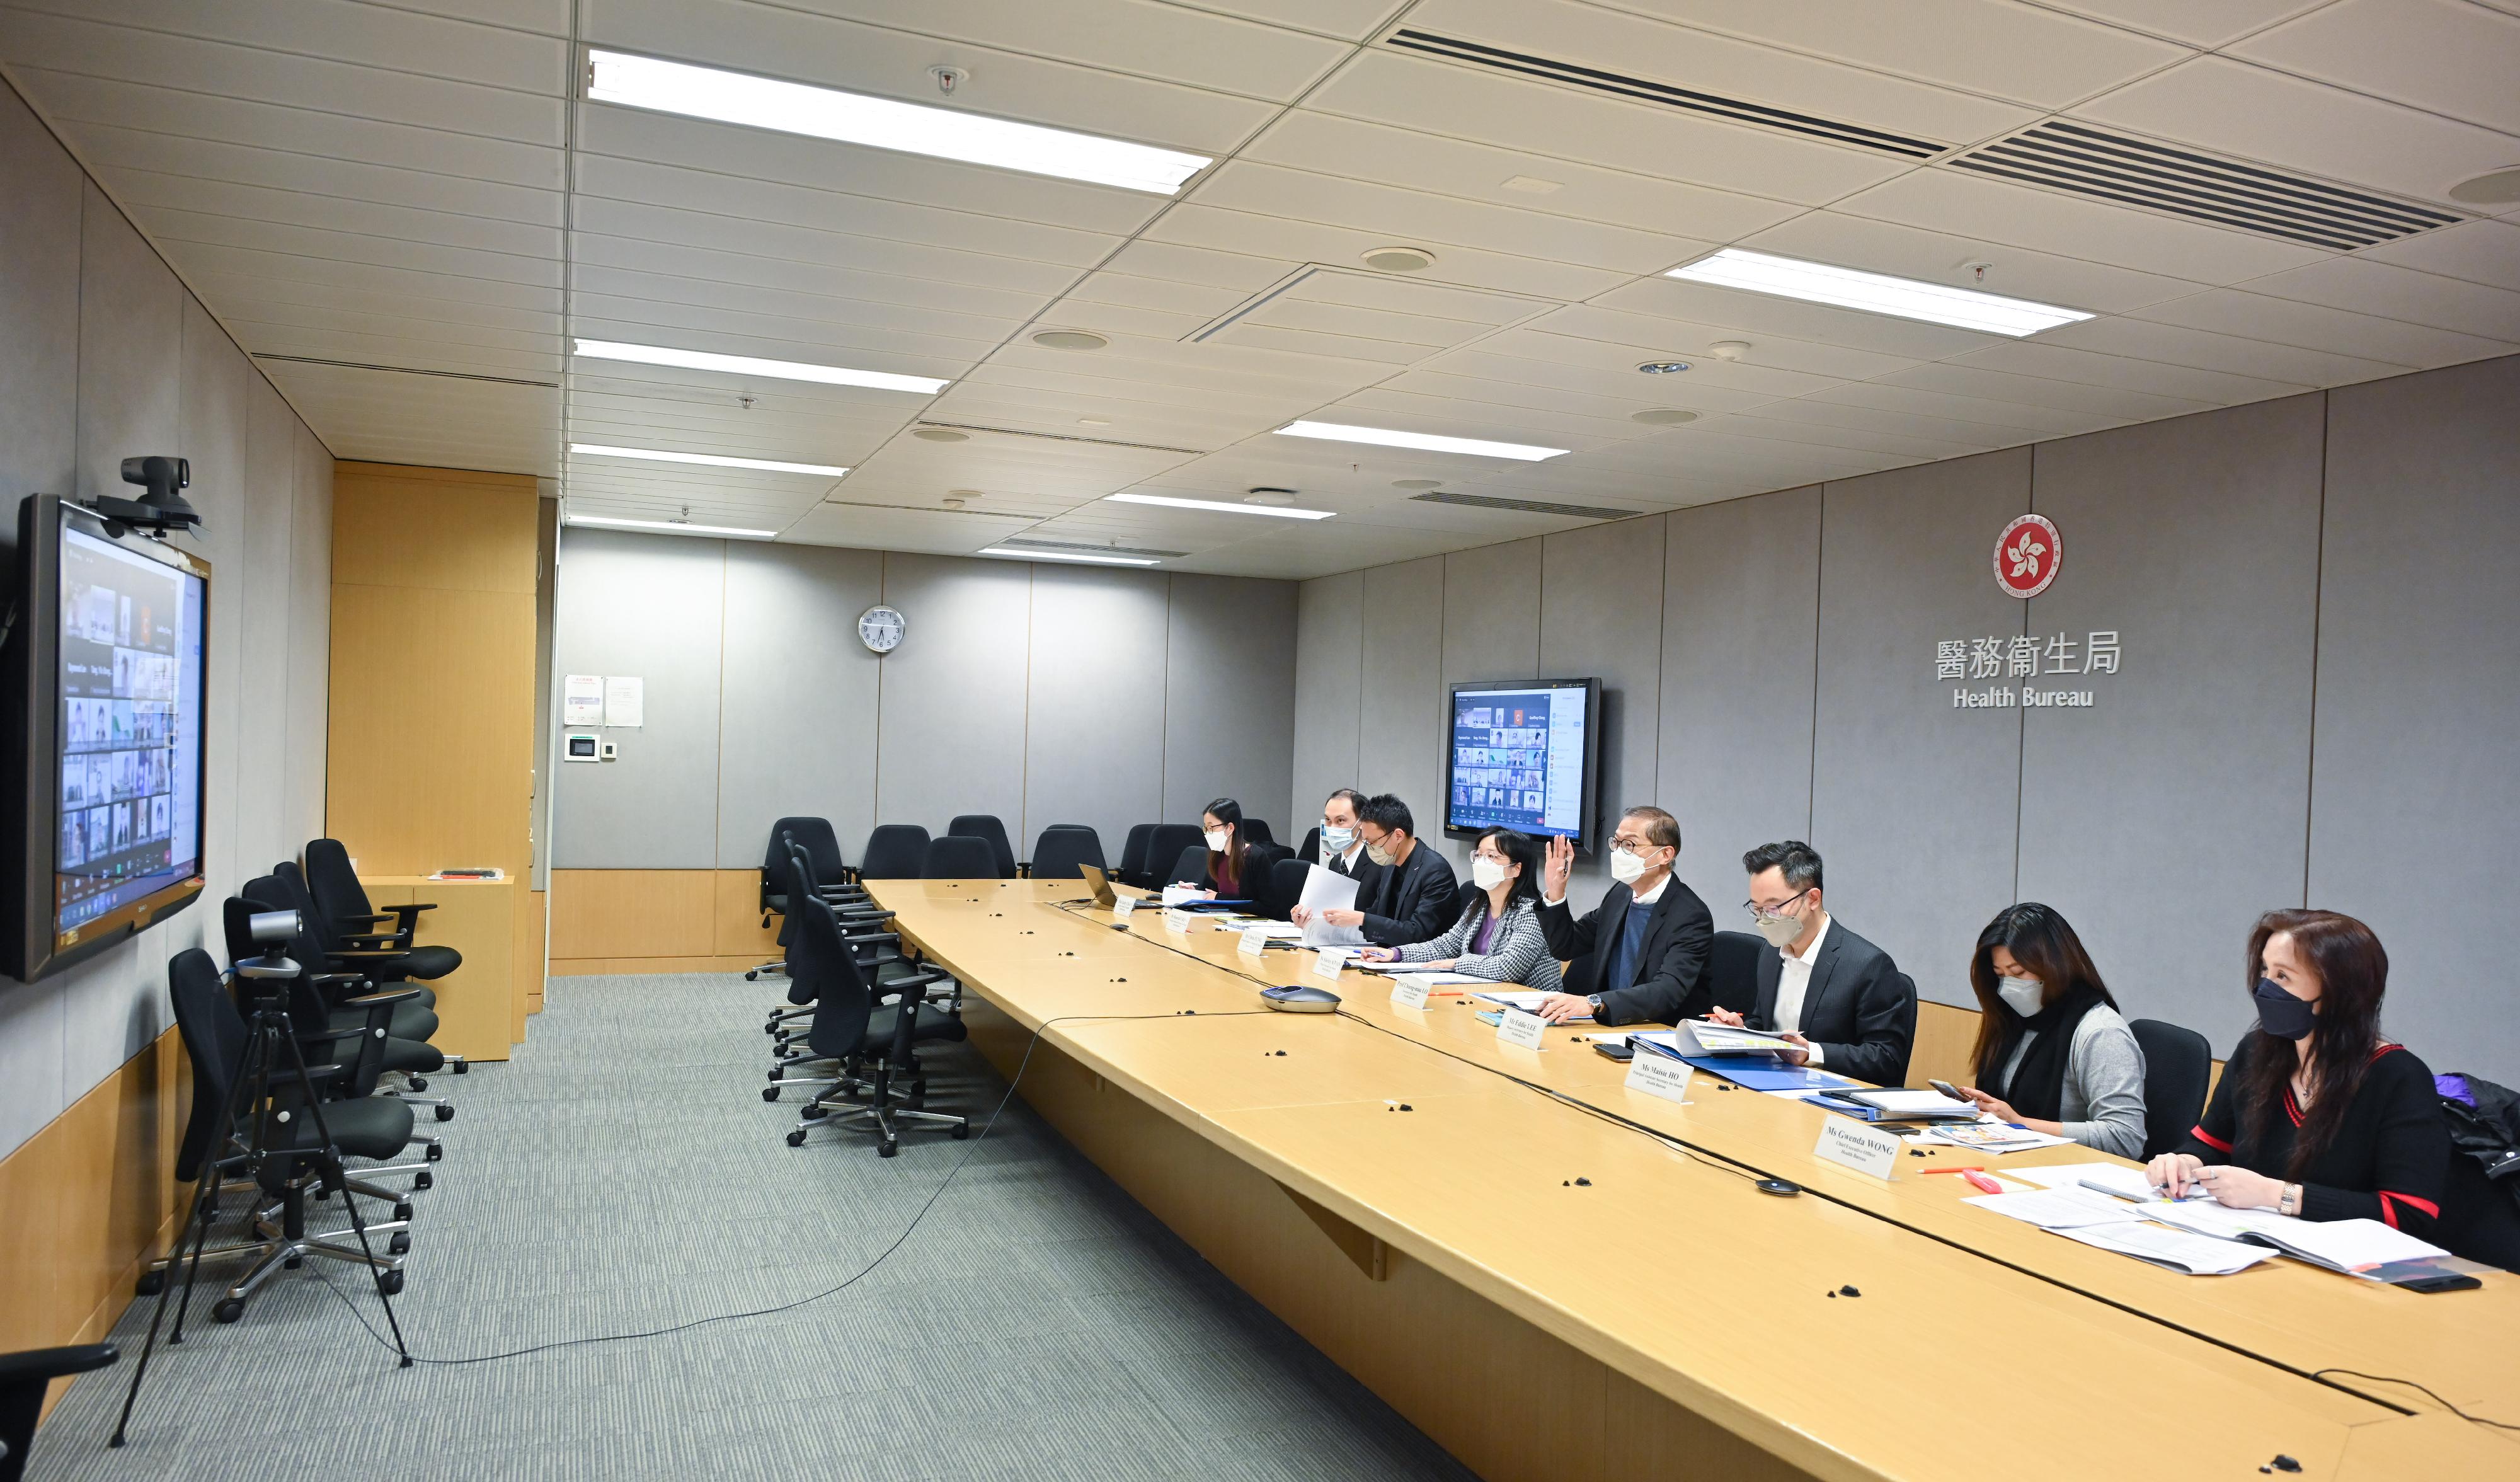 The Secretary for Health, Professor Lo Chung-mau (fourth right), met with representatives of the Hong Kong Academy of Medicine, statutory boards and councils of various healthcare professions, as well as healthcare professional bodies accredited under the Accredited Registers Scheme for Healthcare Professions today (December 13), exchanging views on the various healthcare-related policy initiatives in The Chief Executive's 2022 Policy Address.